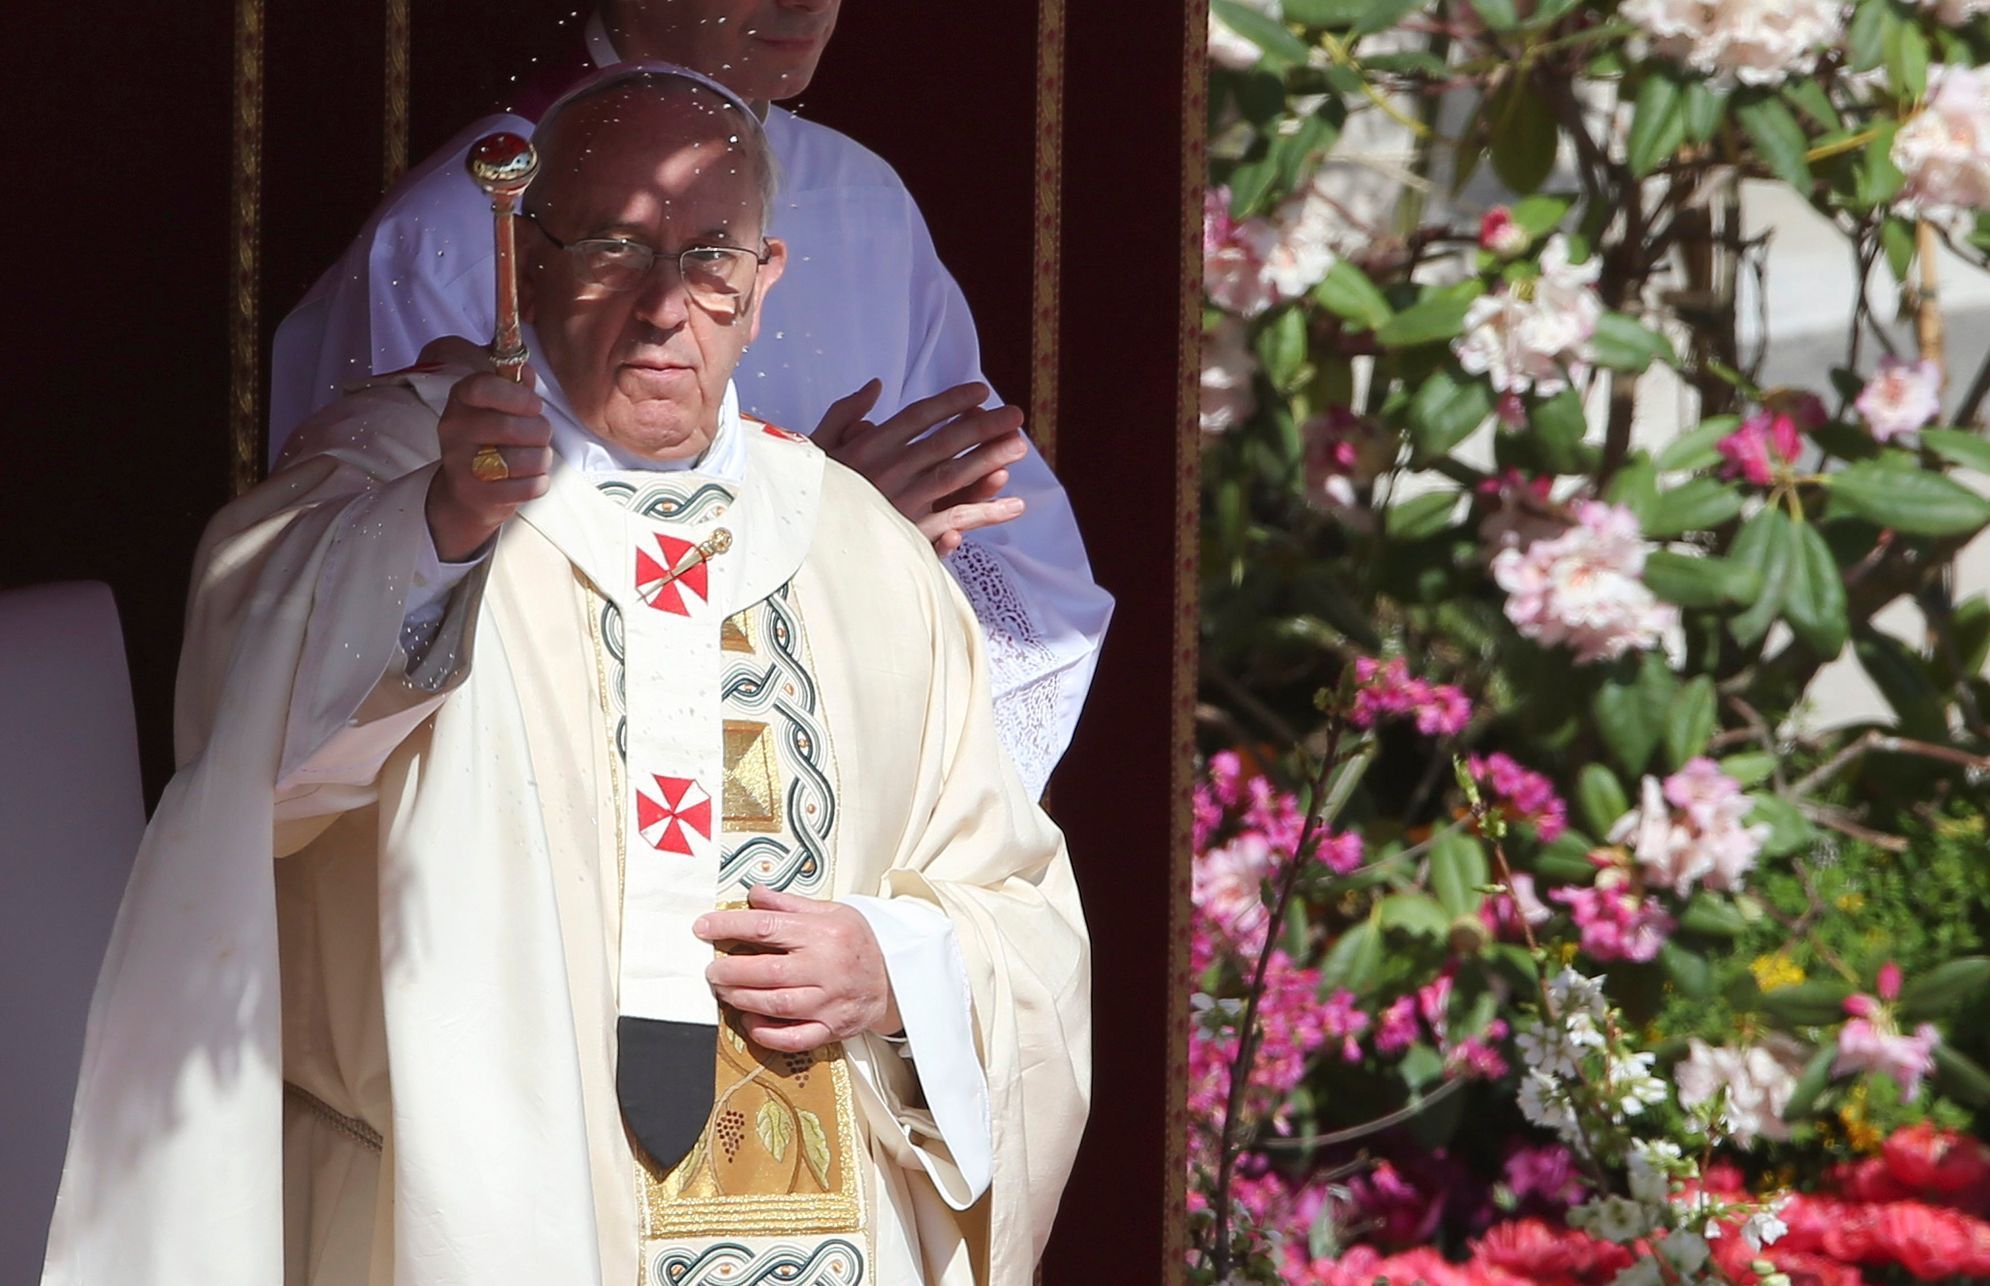 Pope Francis sprinkles holy water as he leads the Easter mass in Saint Peter's Square at the Vatican